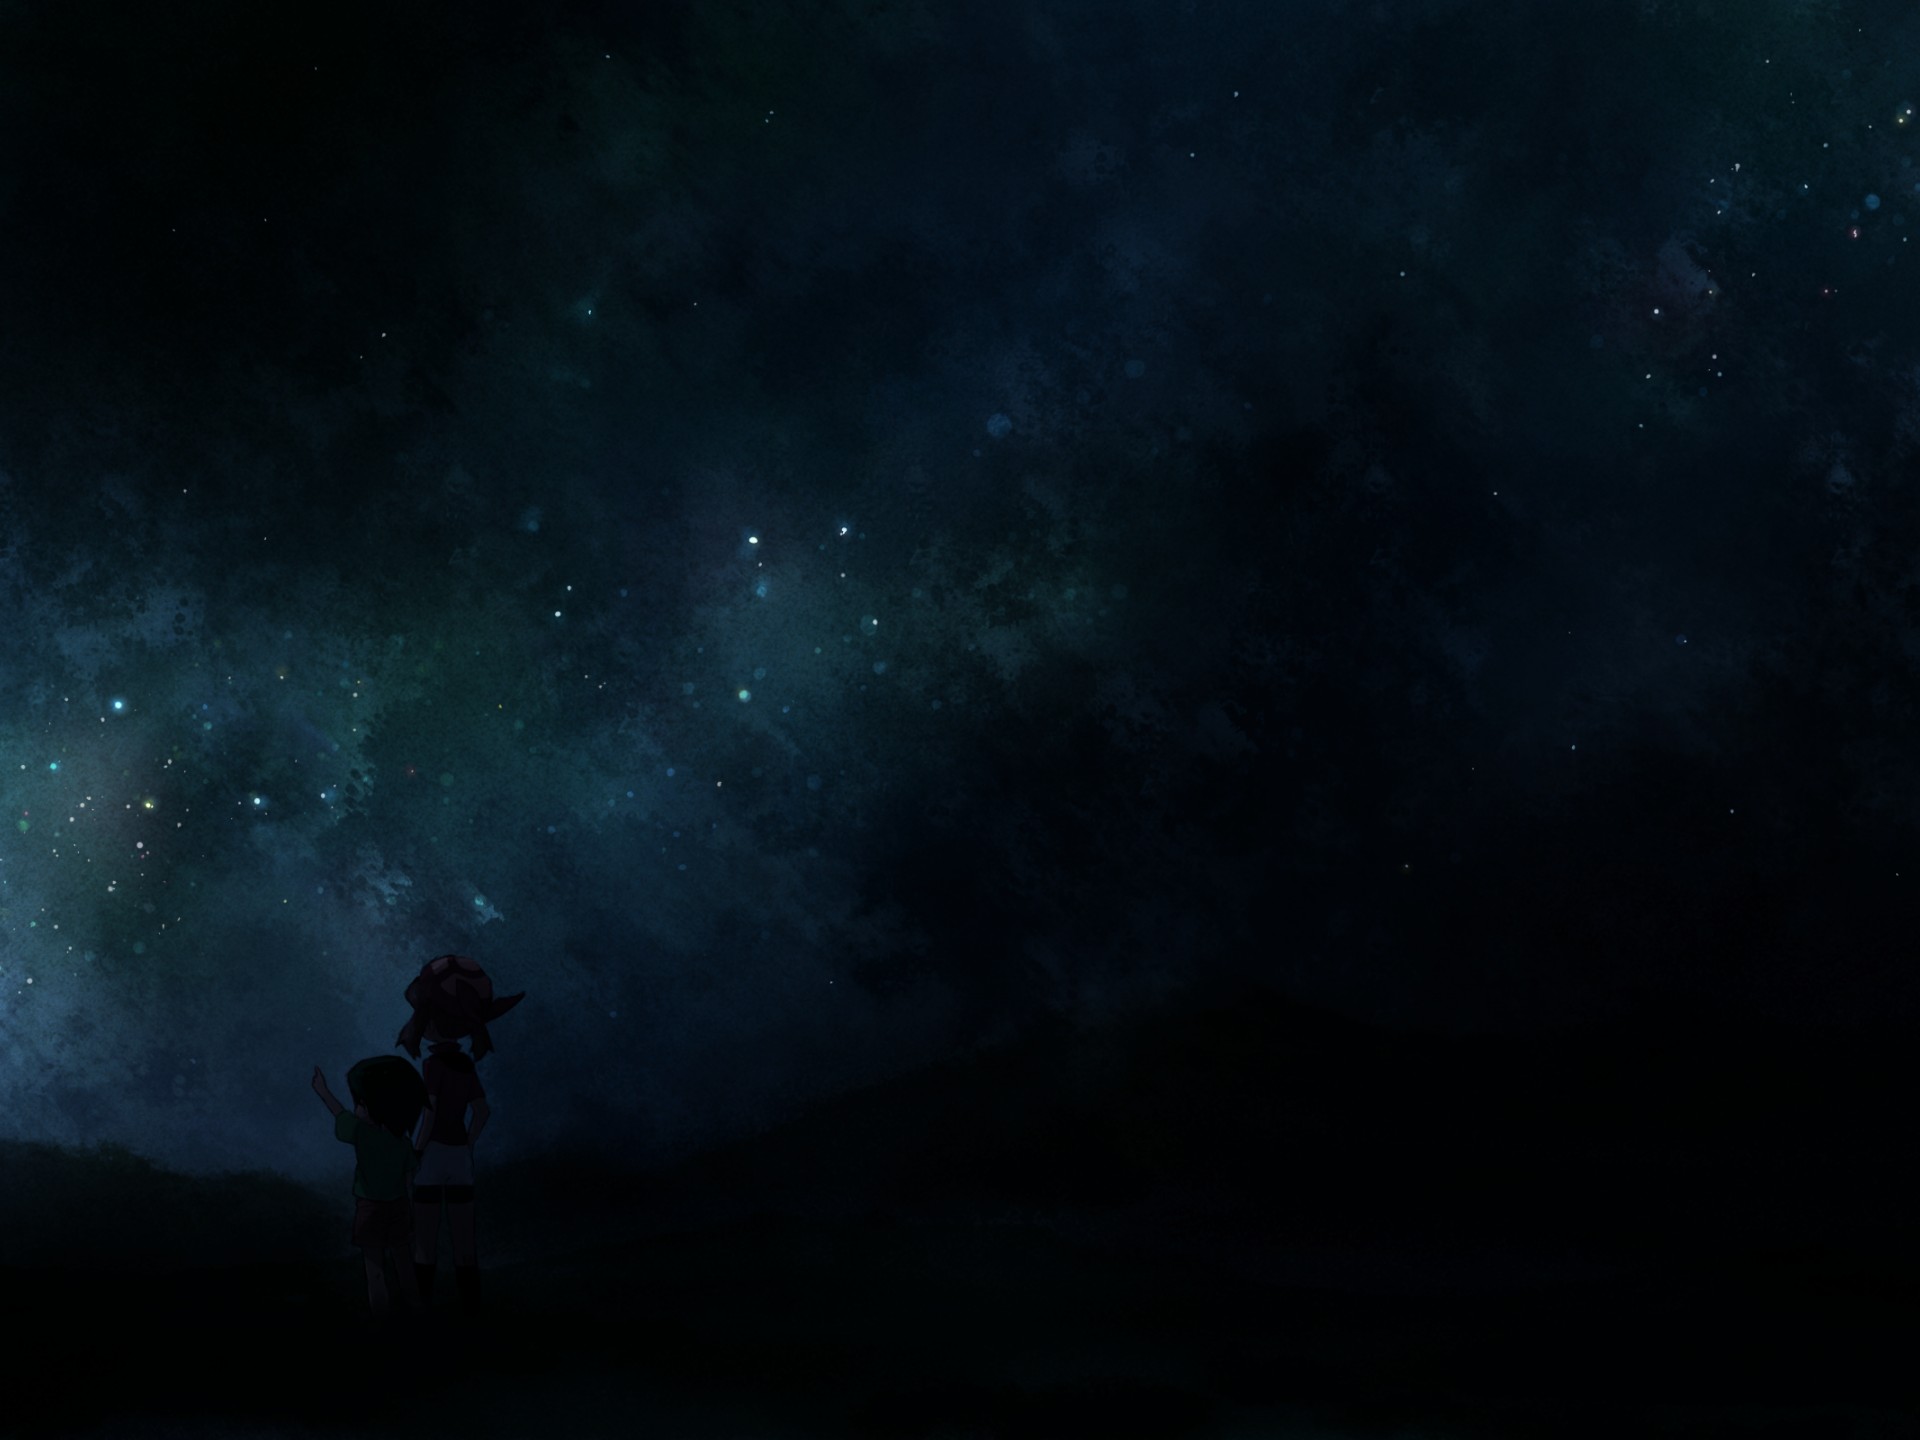 Anime characters May and Max under a starry night sky wallpaper.